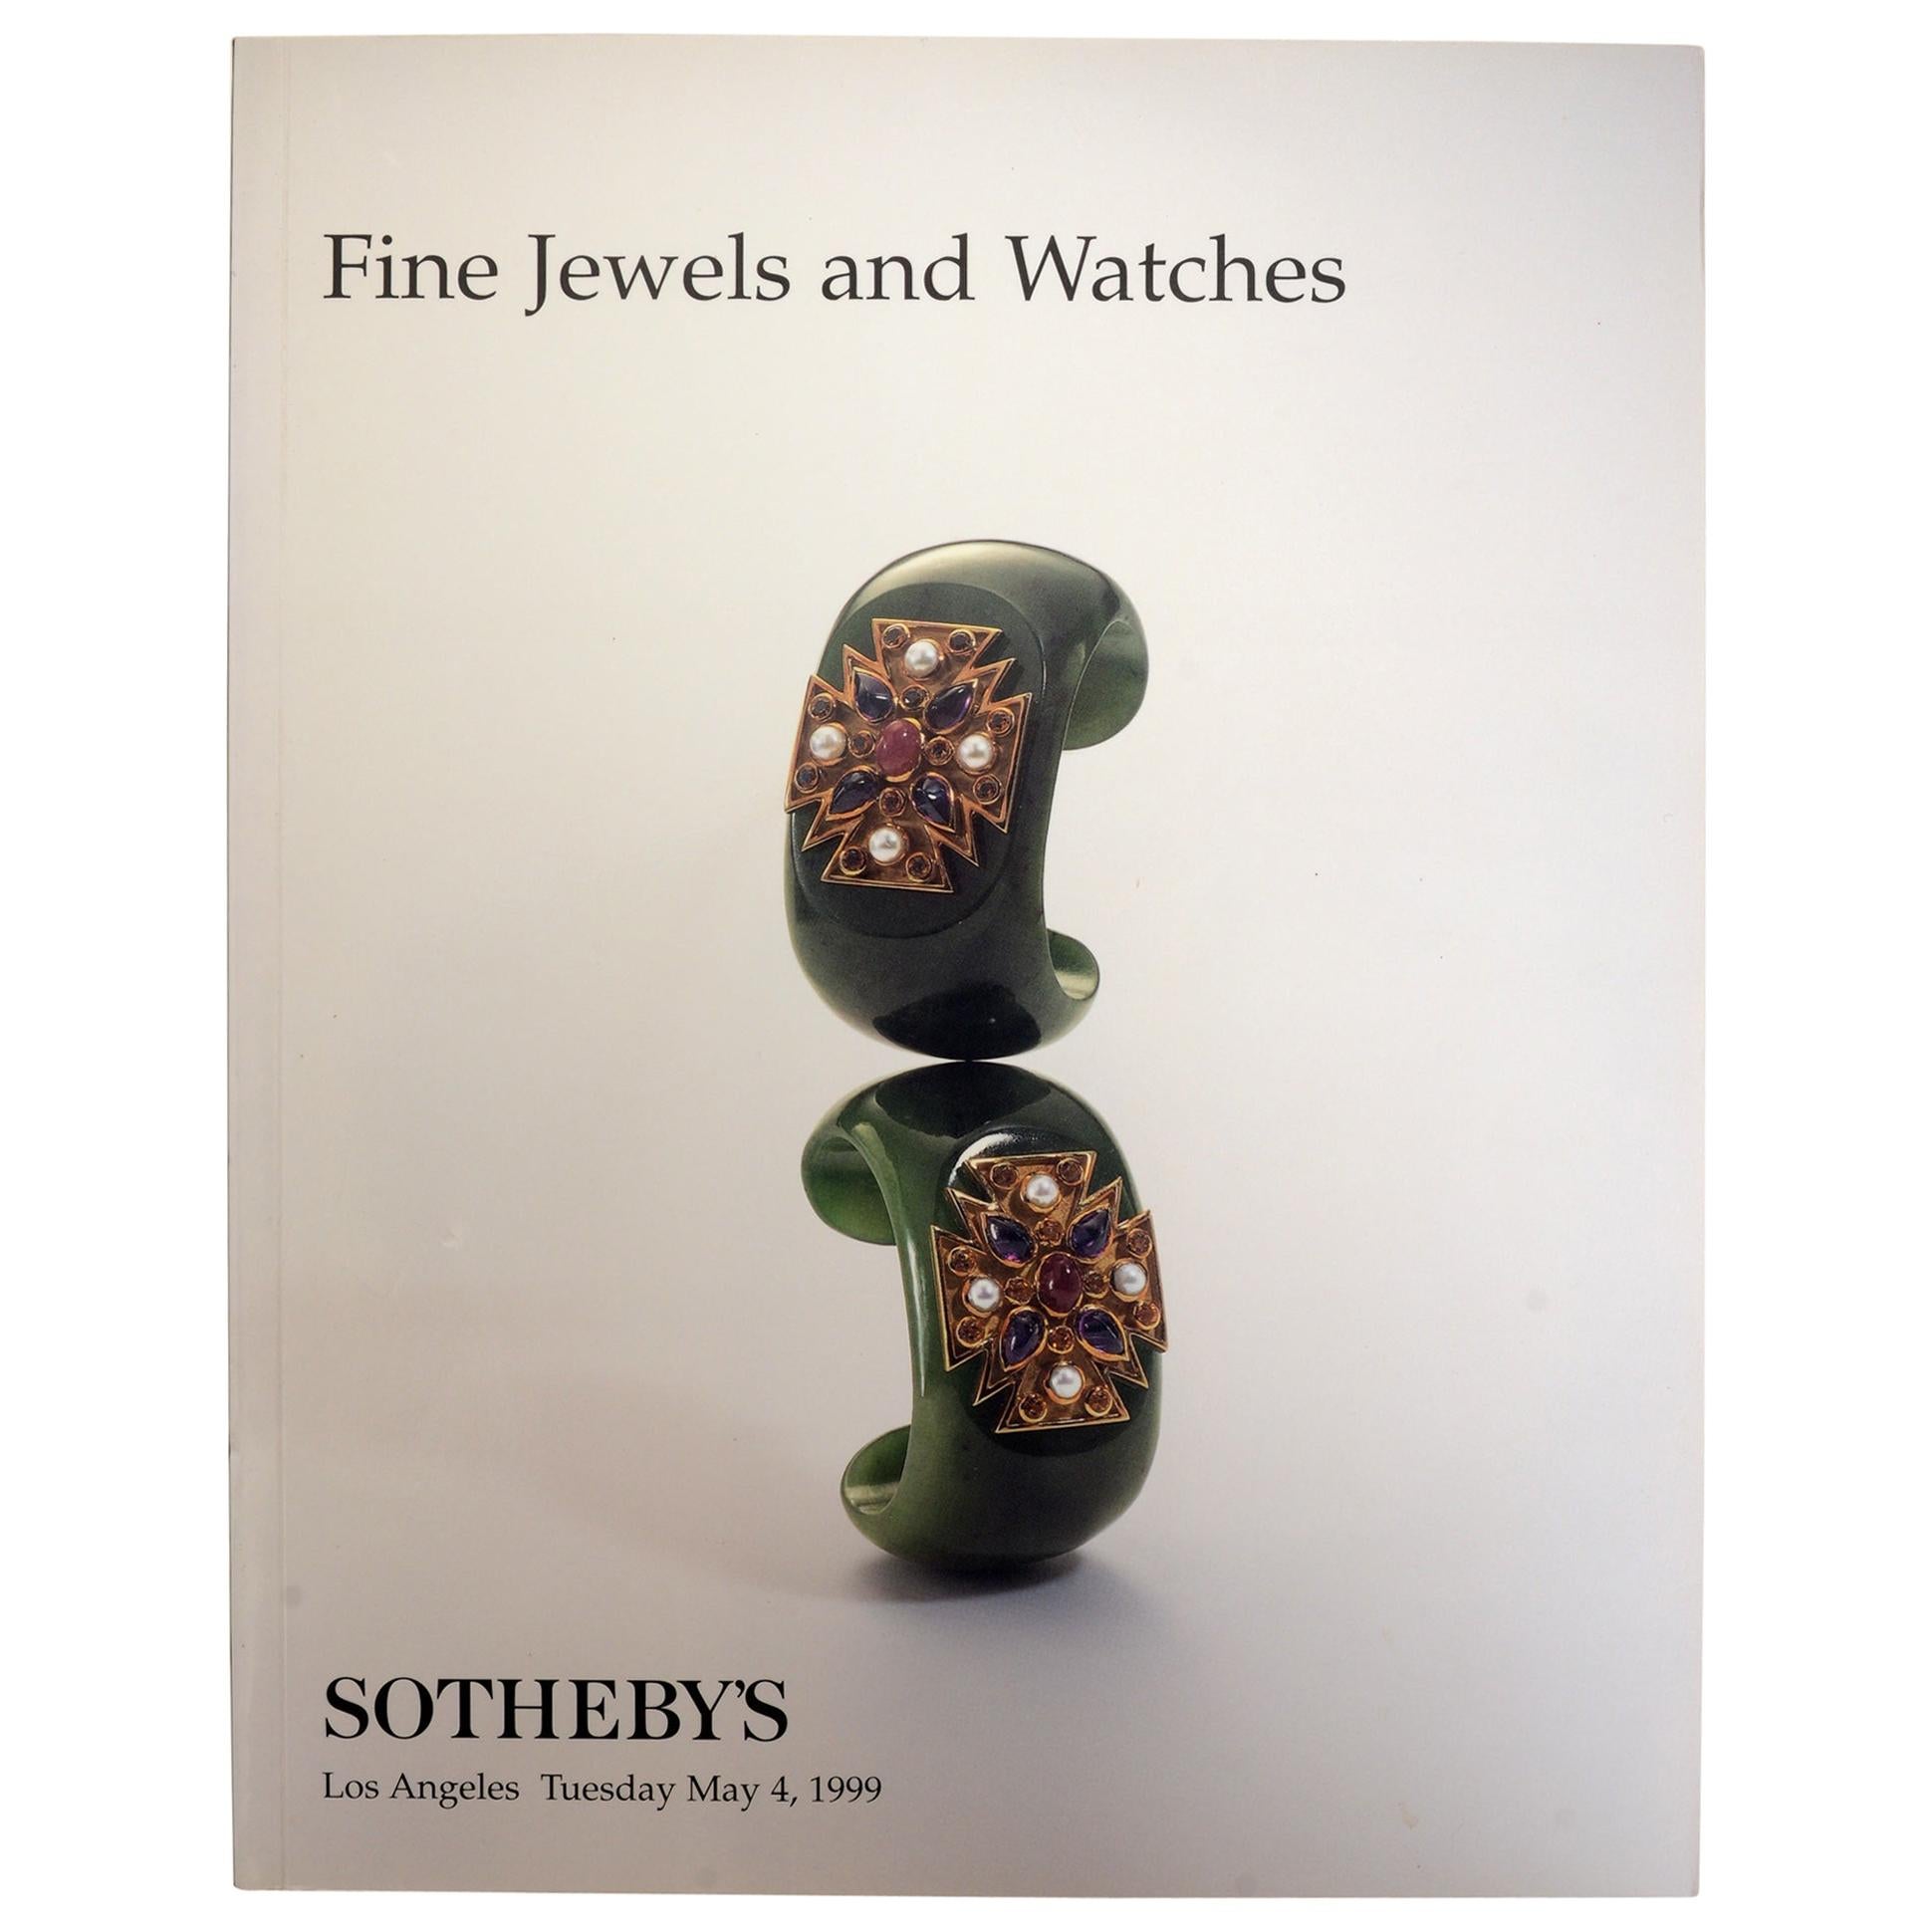 Fine Jewels and Watches. Sotheby's Sale 7312, Los Angeles, May 4, 1999 For Sale